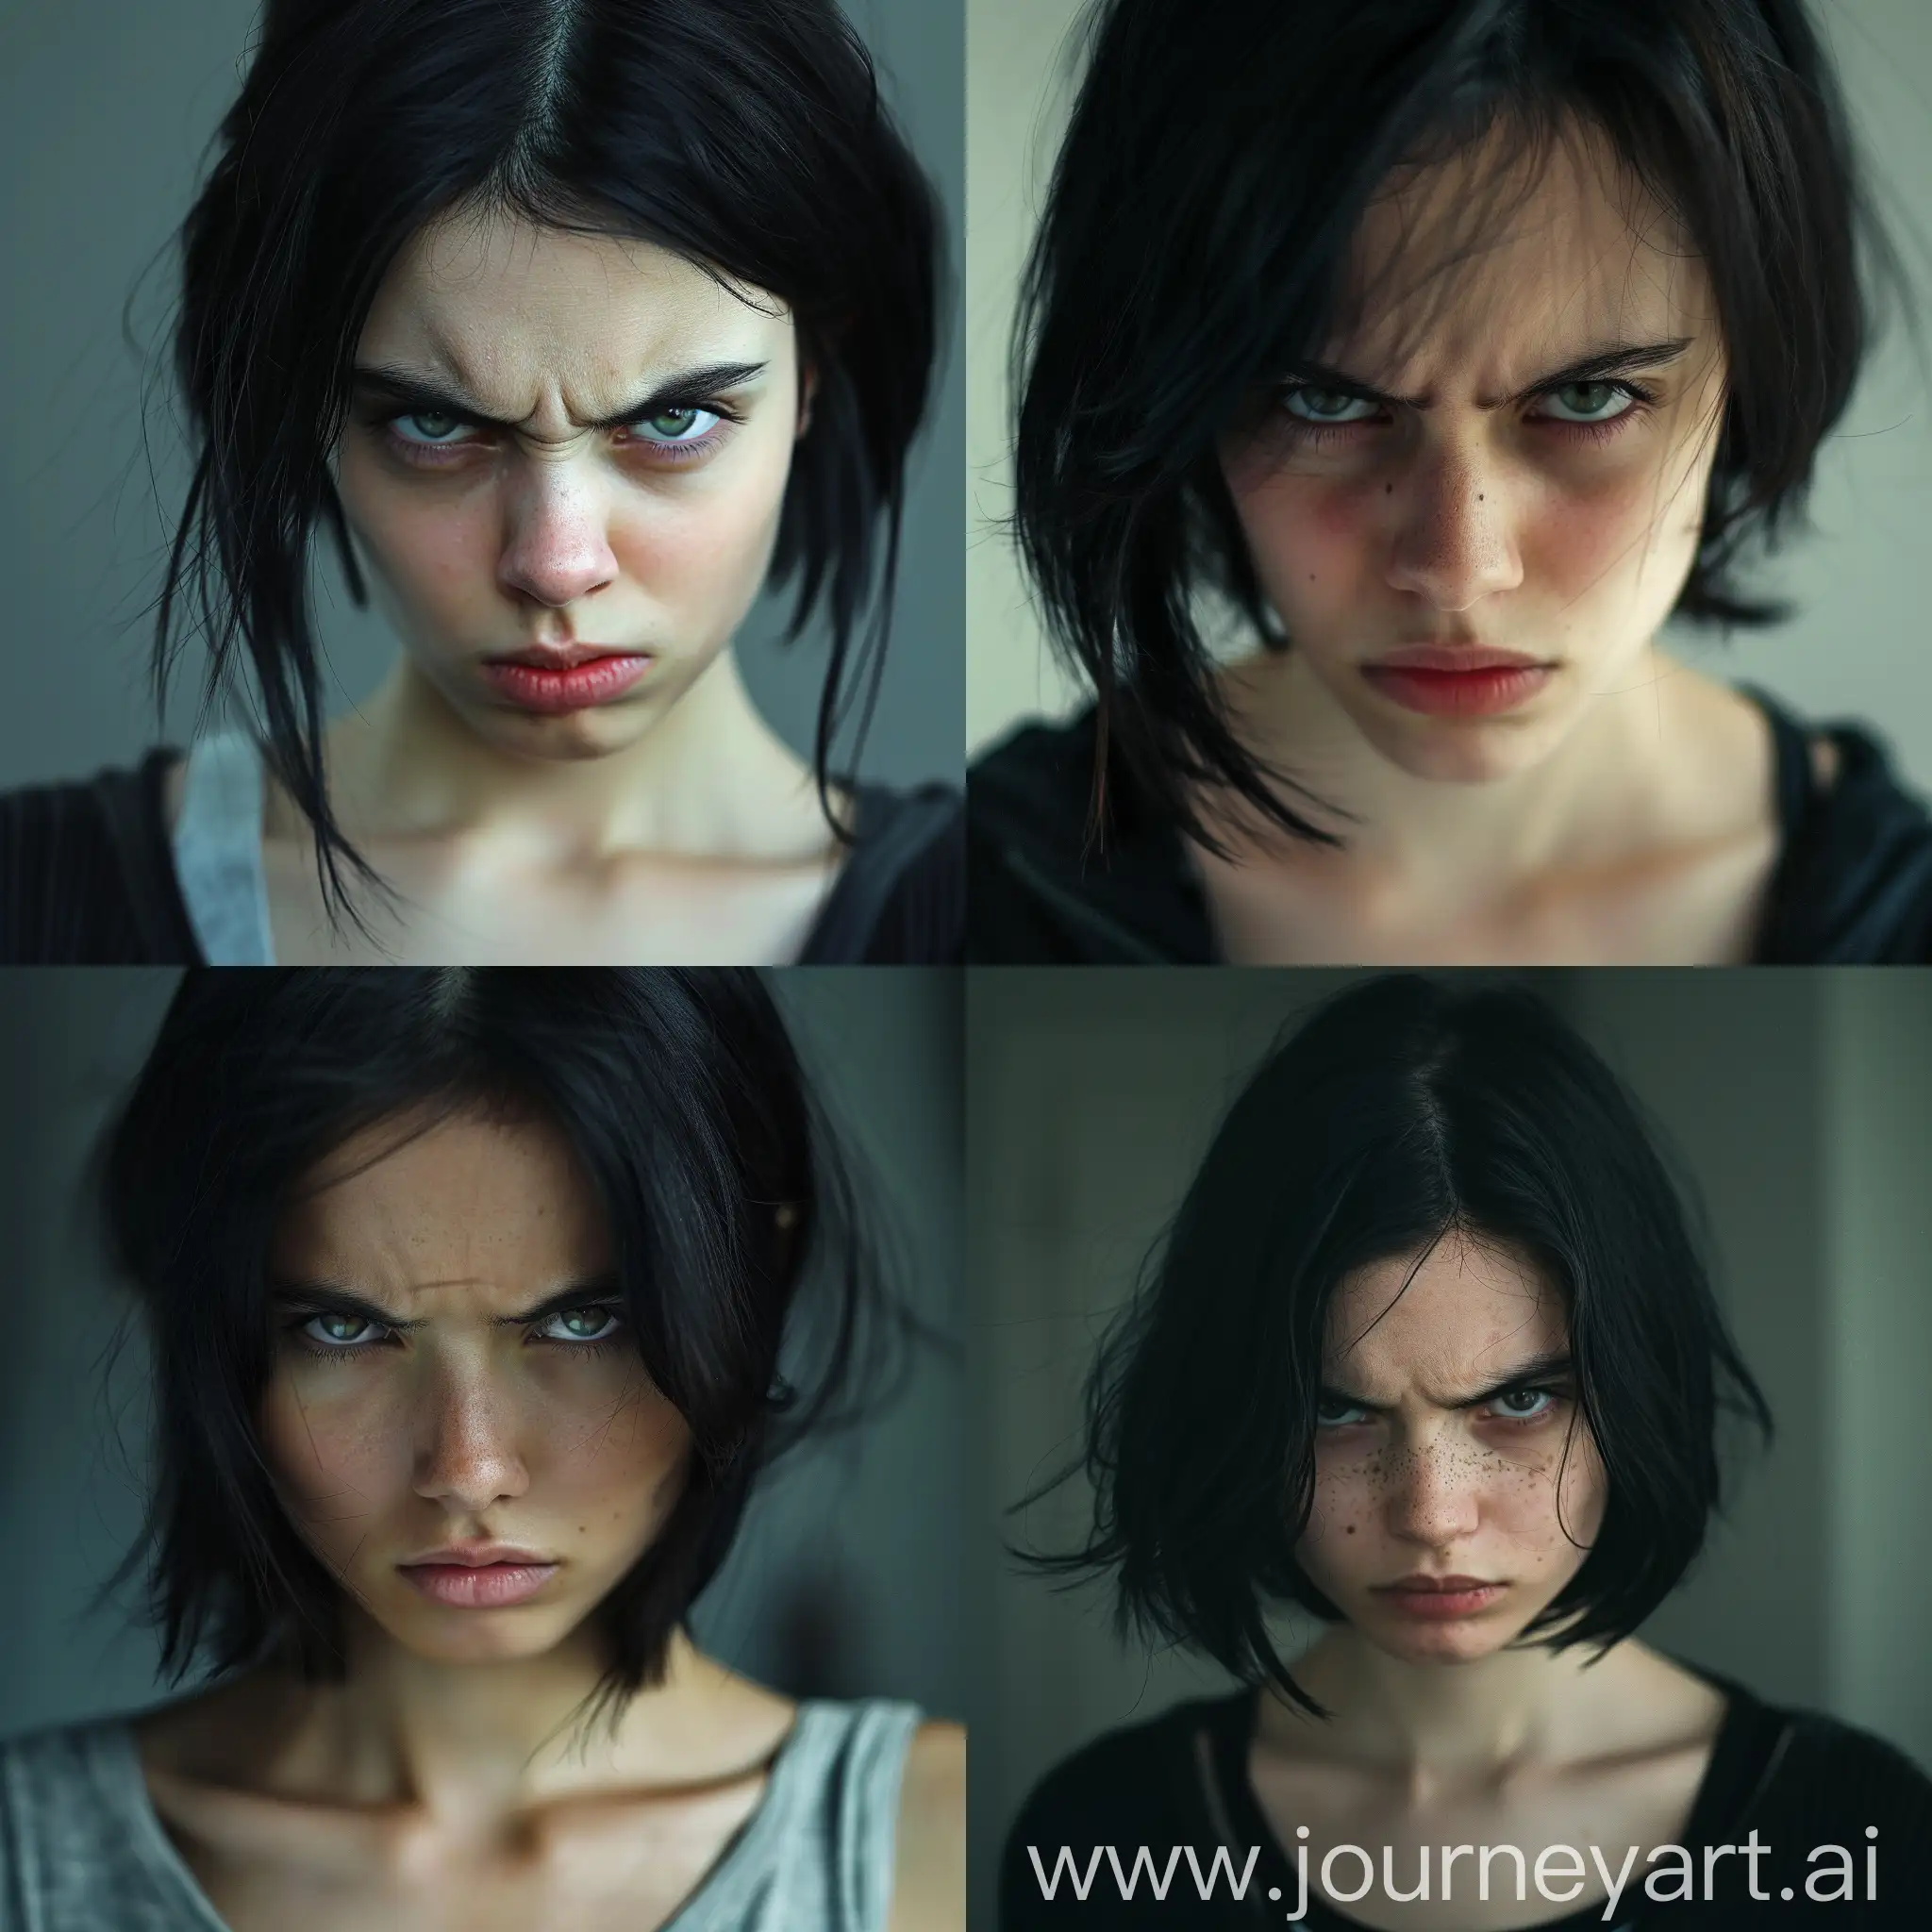 Fierce-BlackHaired-Woman-Expressing-Anger